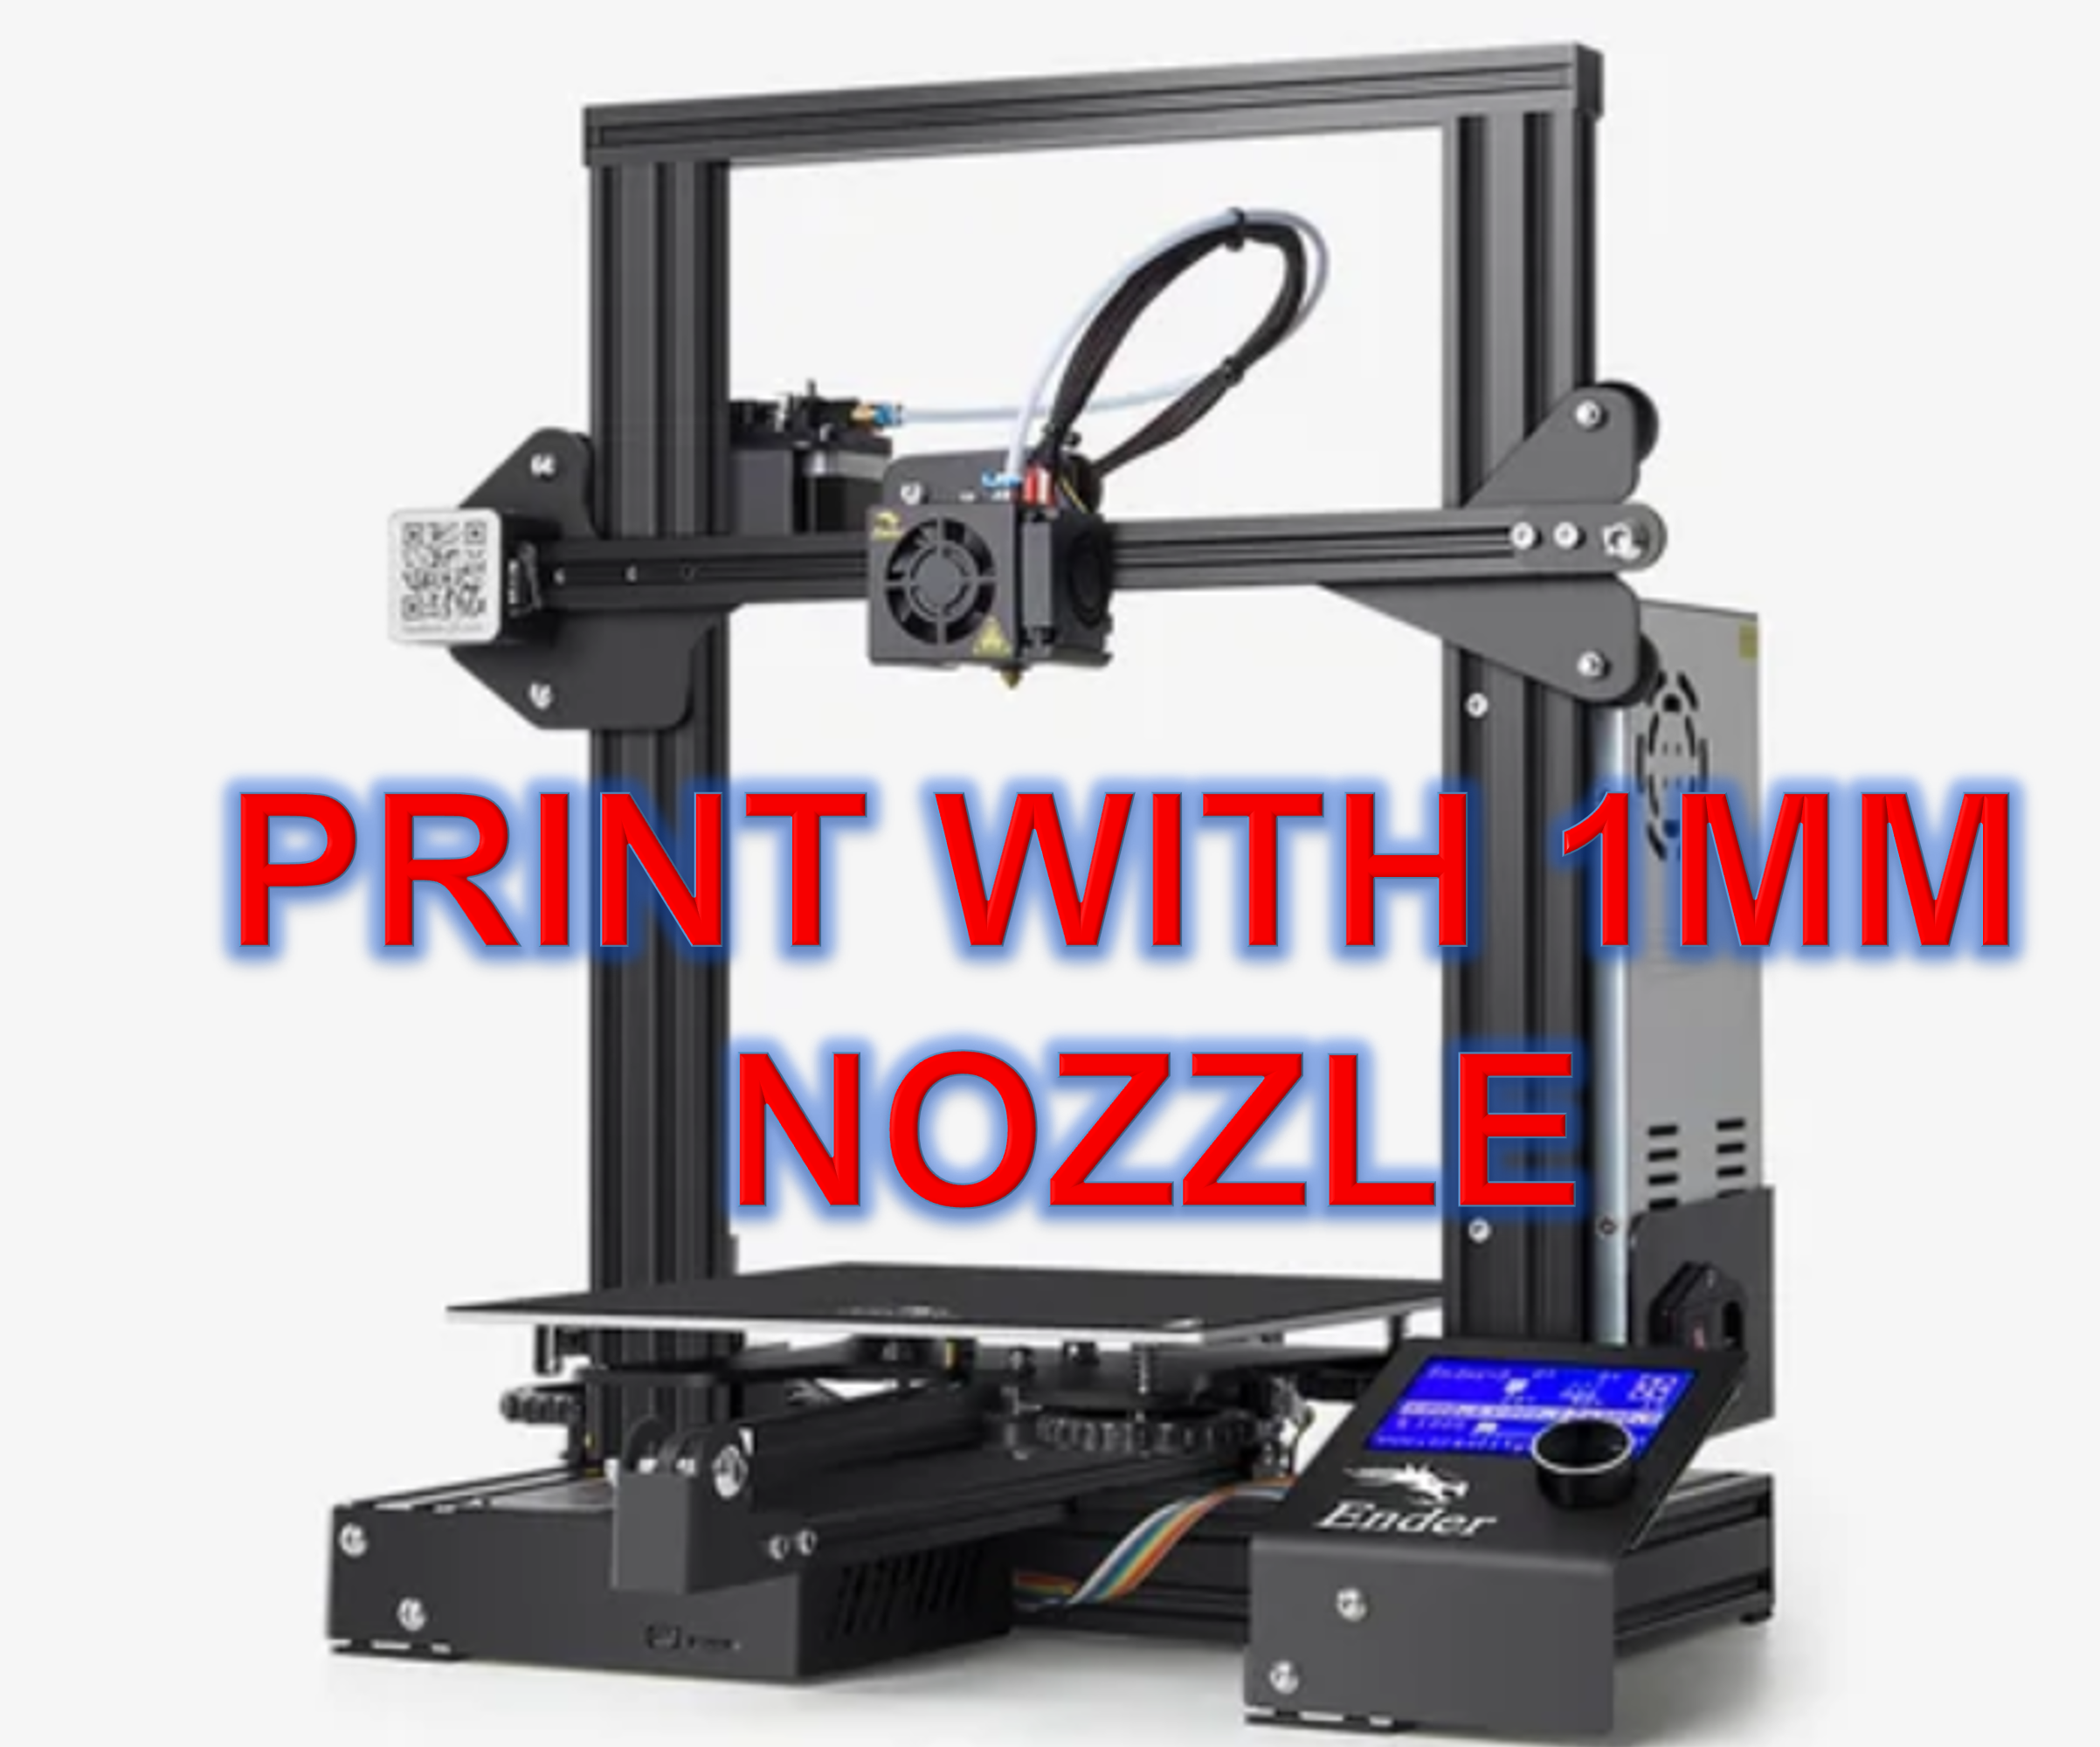 Ender 3 Upgrade Part 3 1MM Nozzle